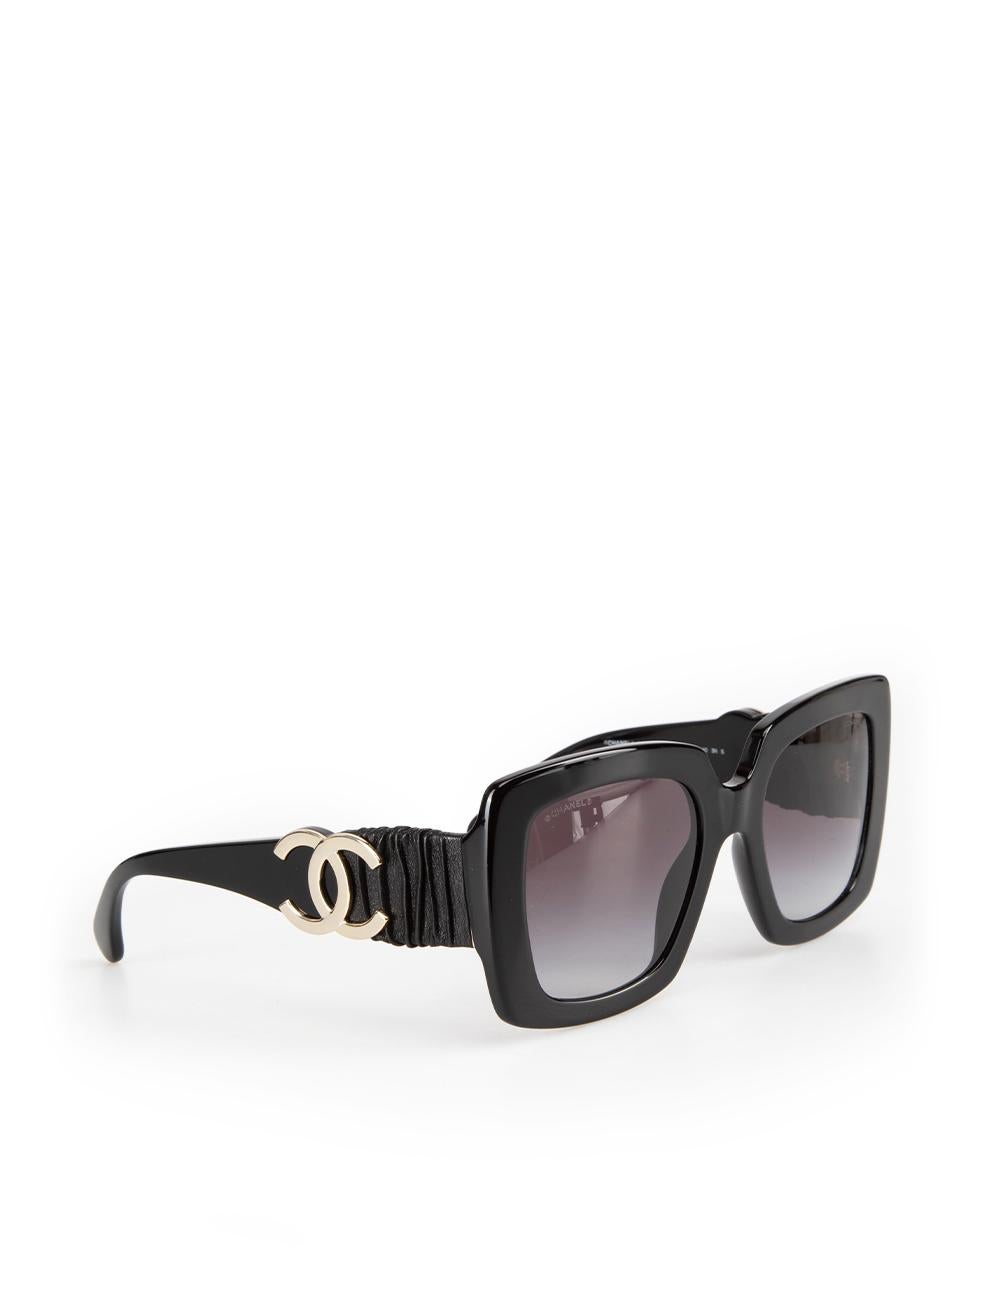 Chanel Black Square Leather Detail Arms Sunglasses In New Condition For Sale In London, GB